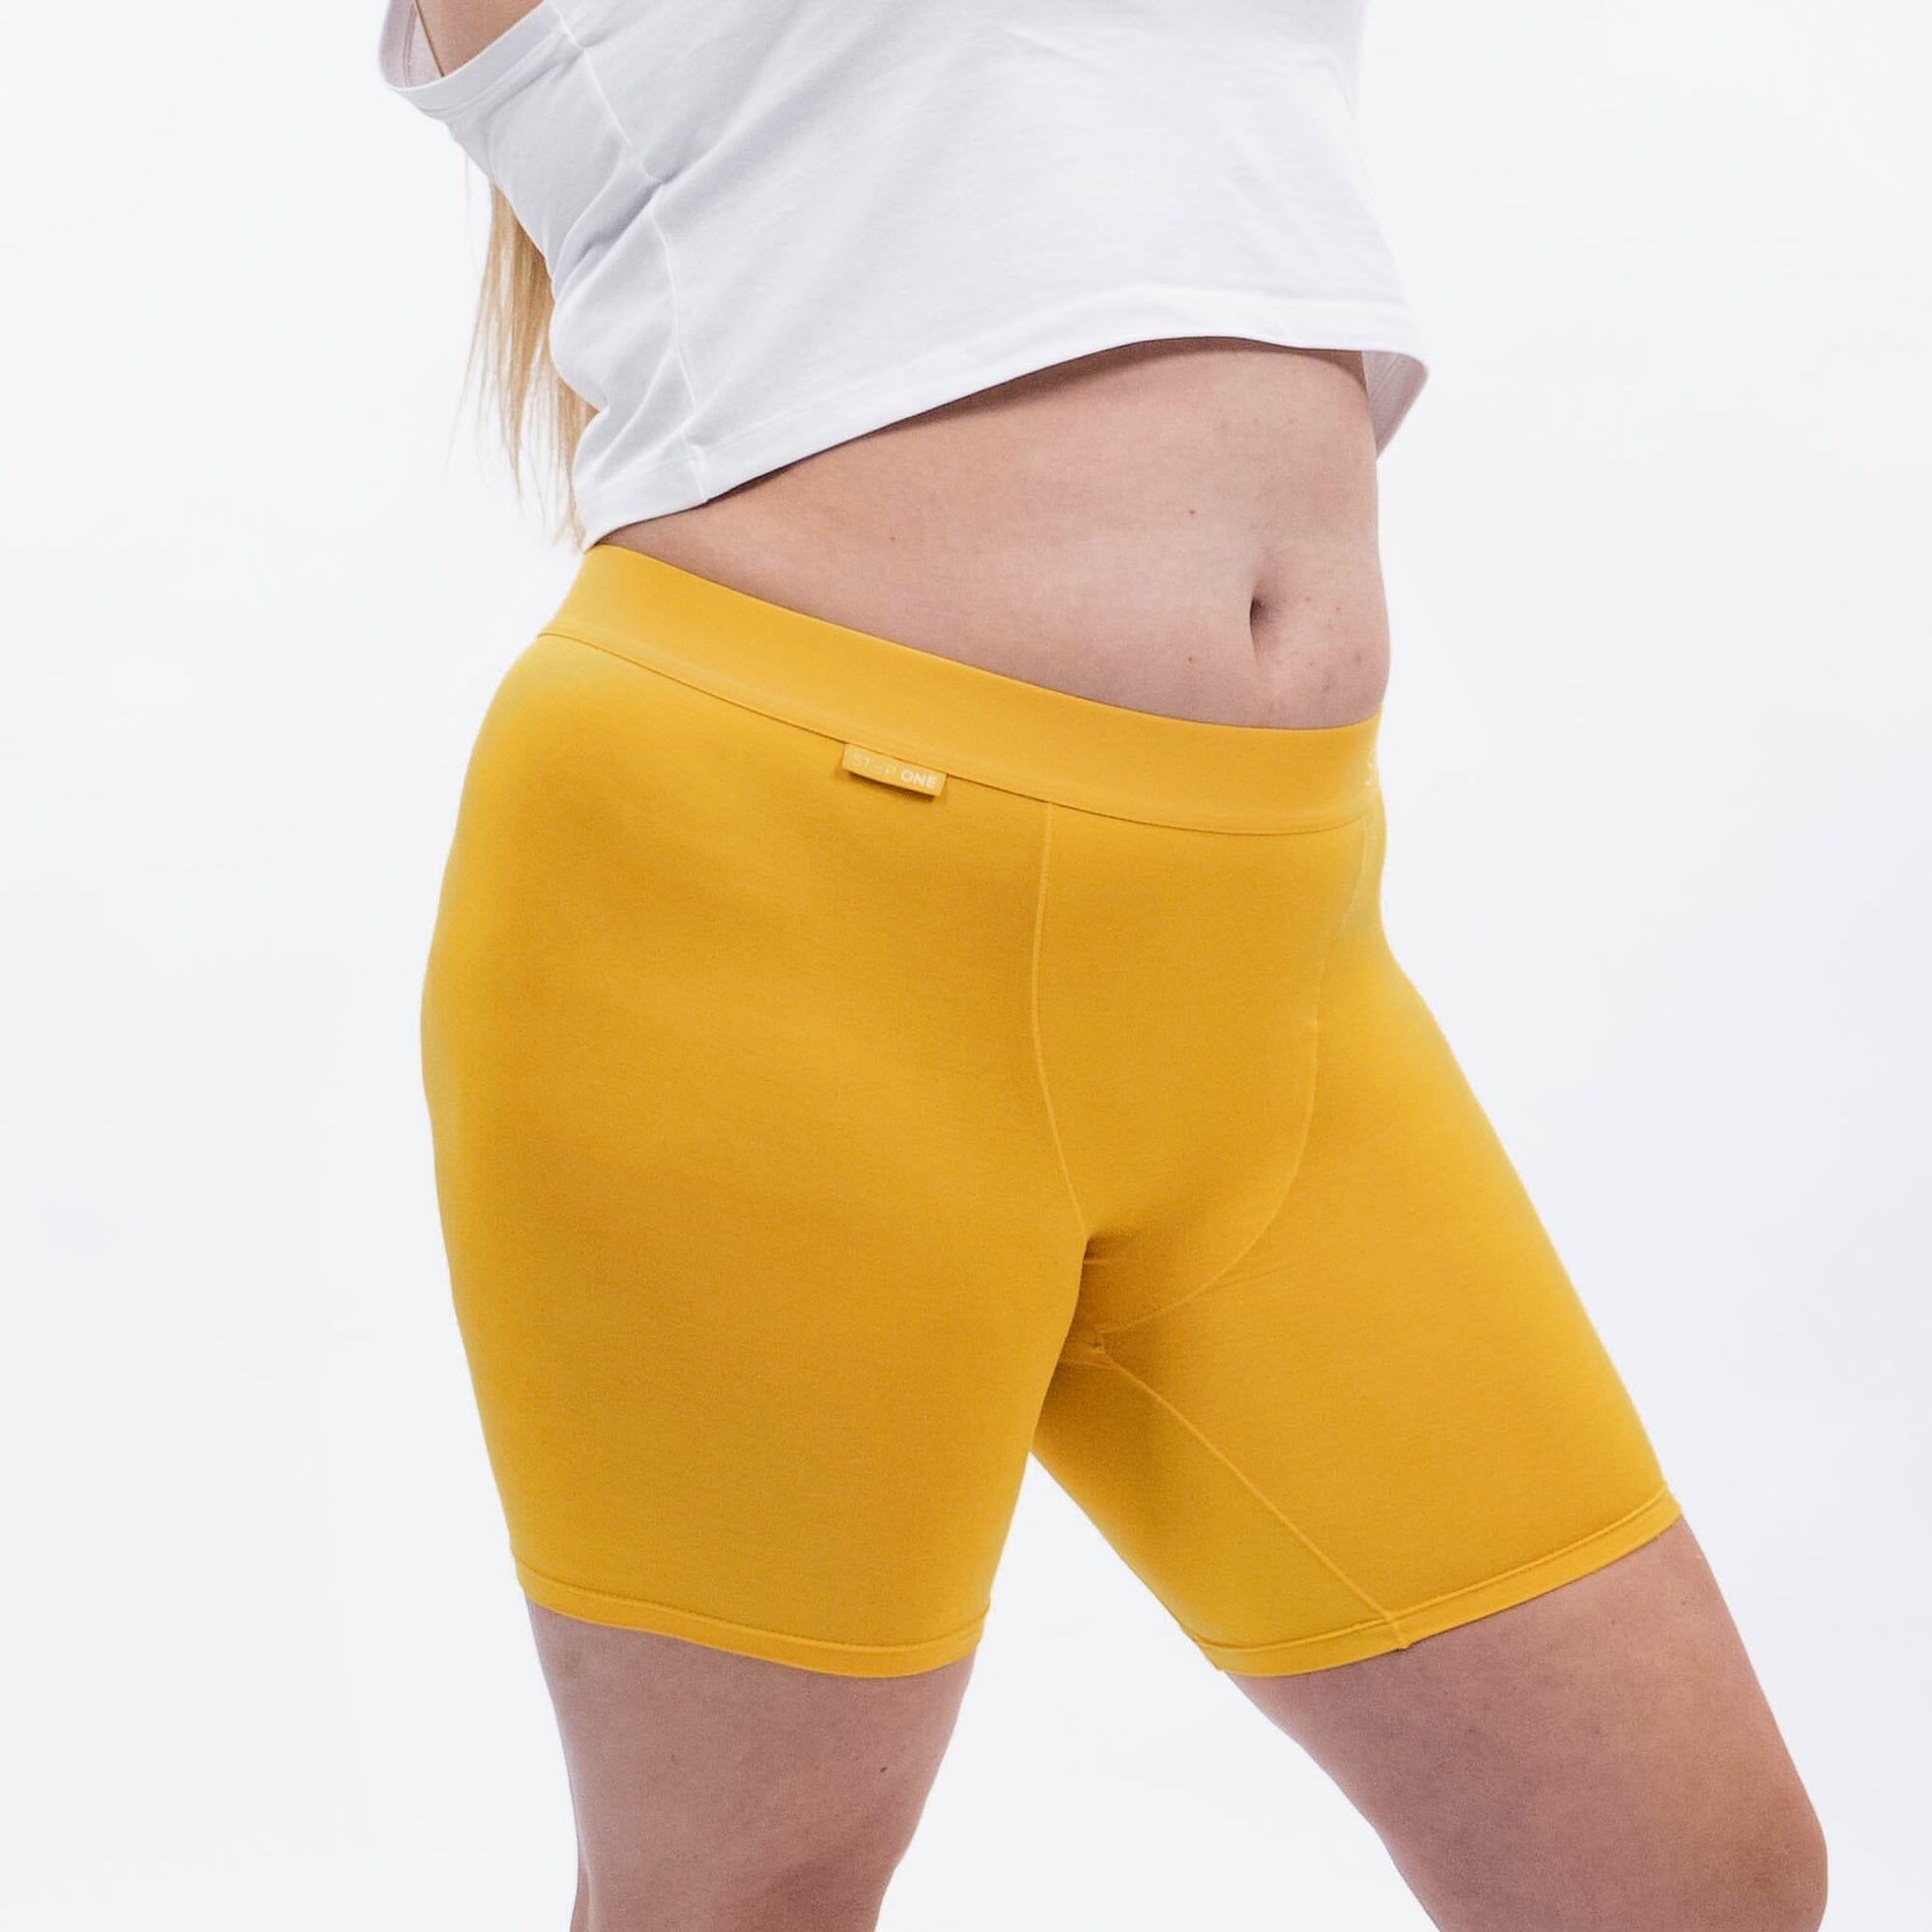 Women's Boxer Brief - Cheeky Cheddars - Model - #size_XL